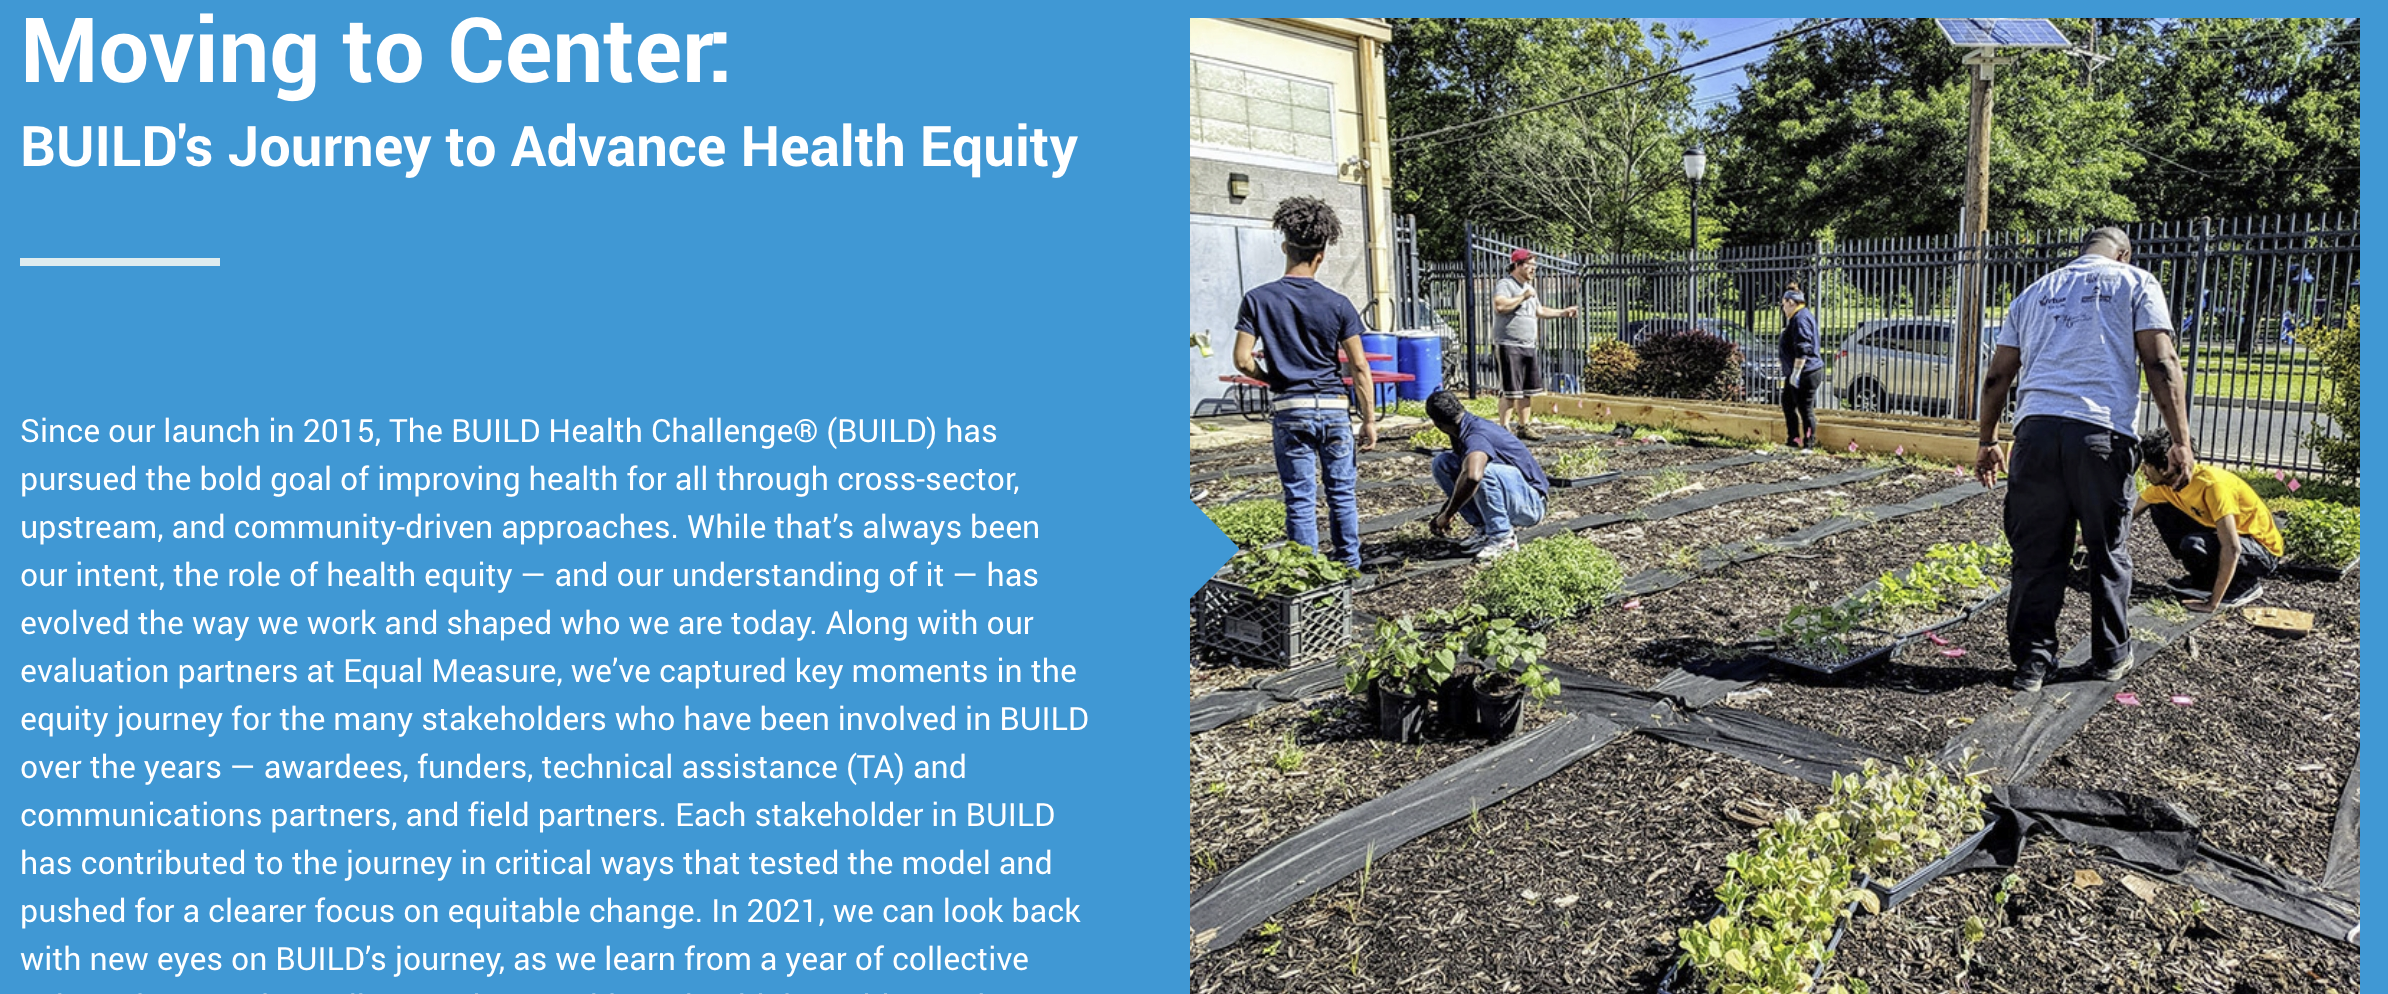 Moving to Center: BUILD's Journey to Advance Health Equity